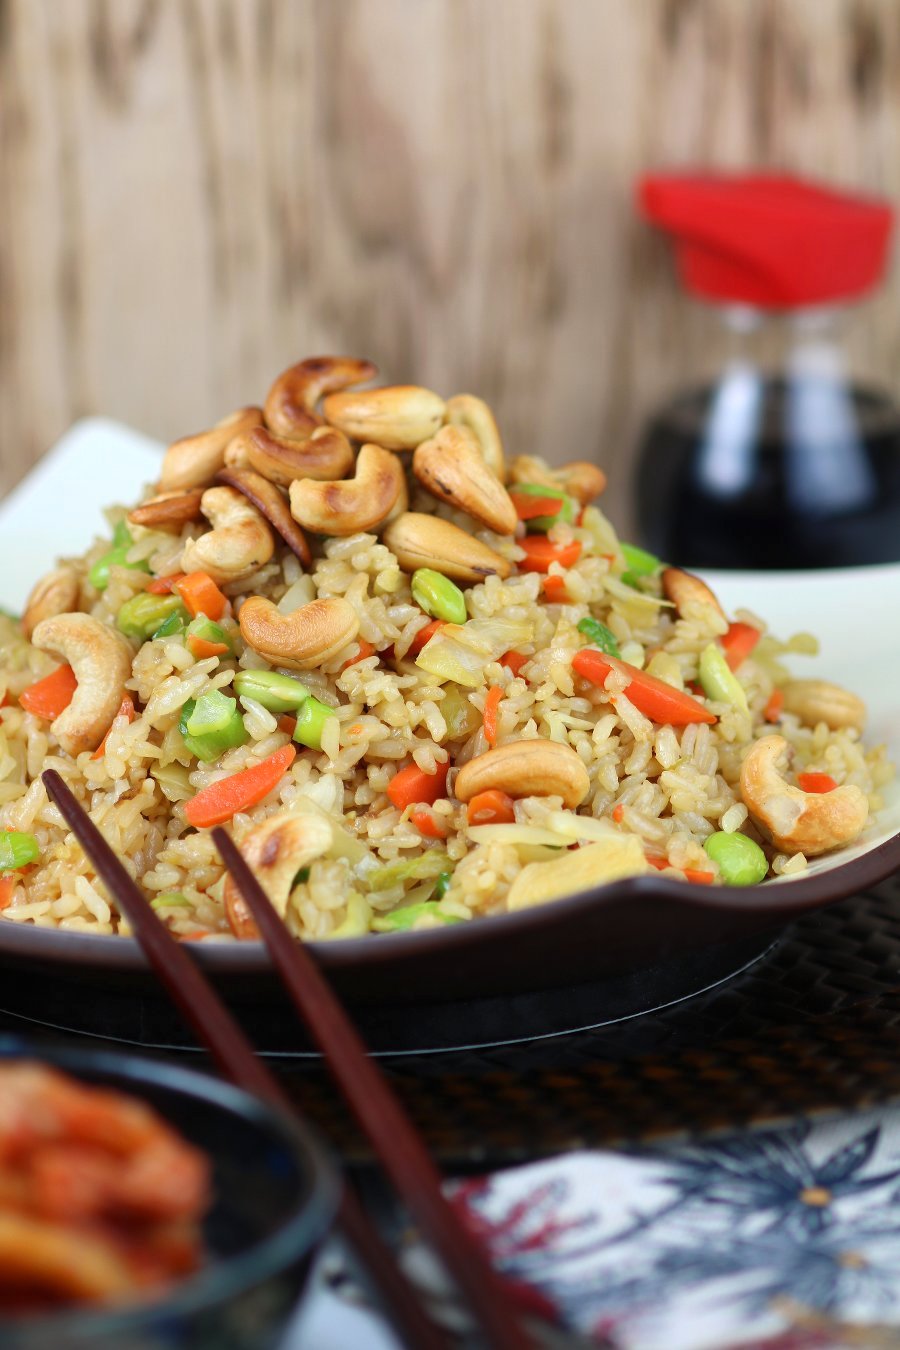 An under 20-minute recipe for Quick Vegetable Fried Rice that uses basic pantry ingredients and veggies you probably have hiding in your fridge!